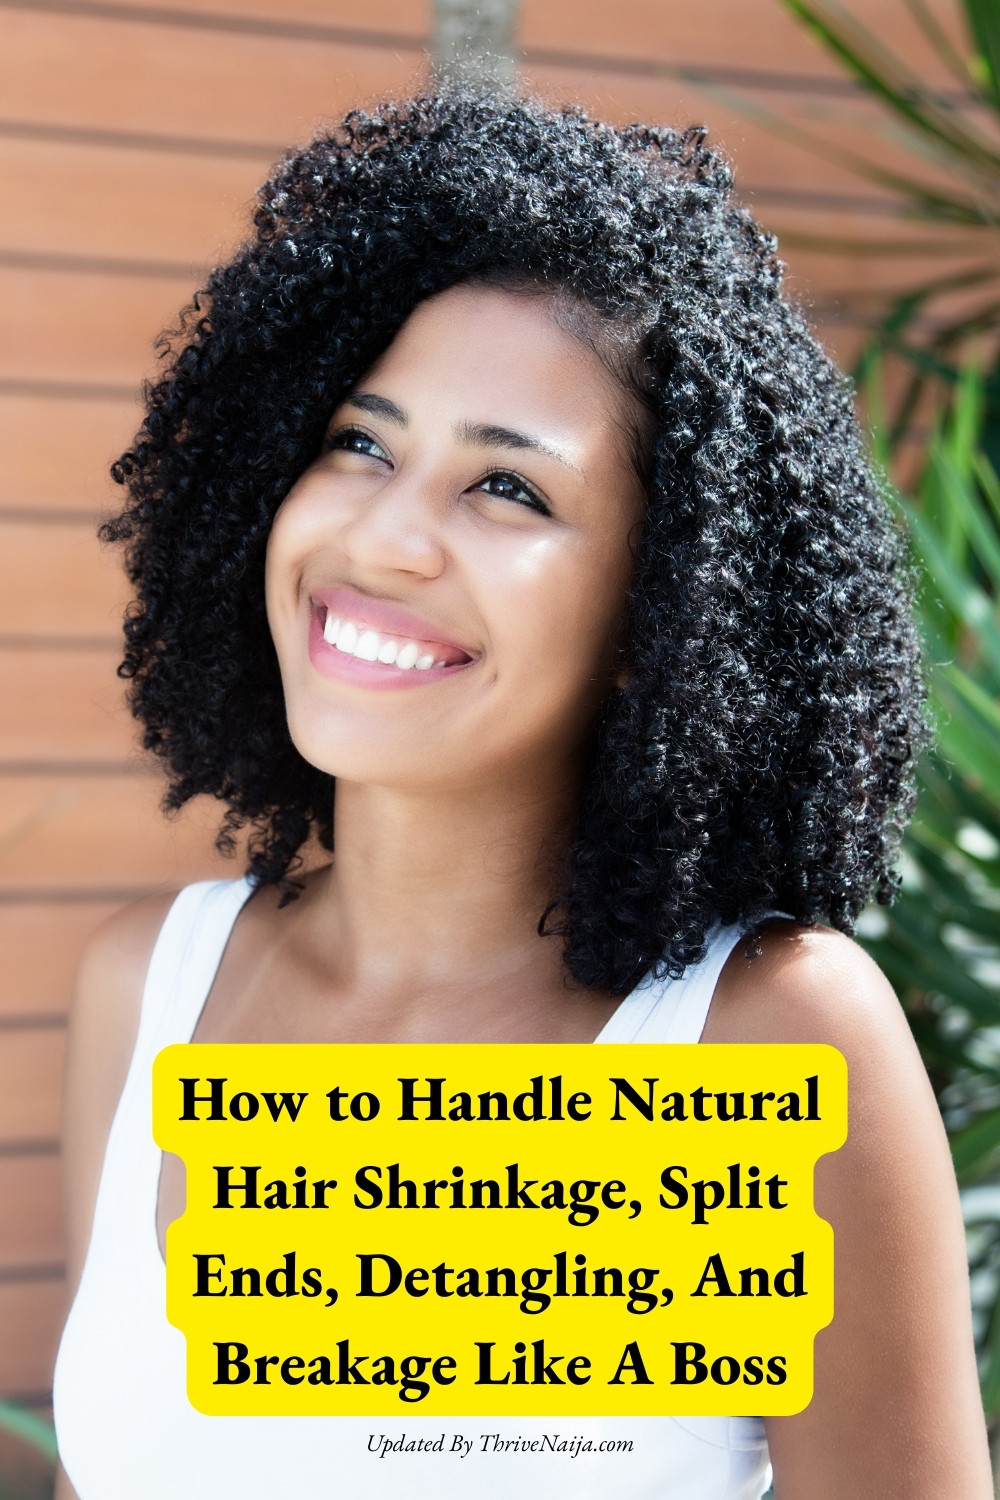 How to Handle Natural Hair Shrinkage, Split Ends, Detangling, And Breakage Like A Boss
